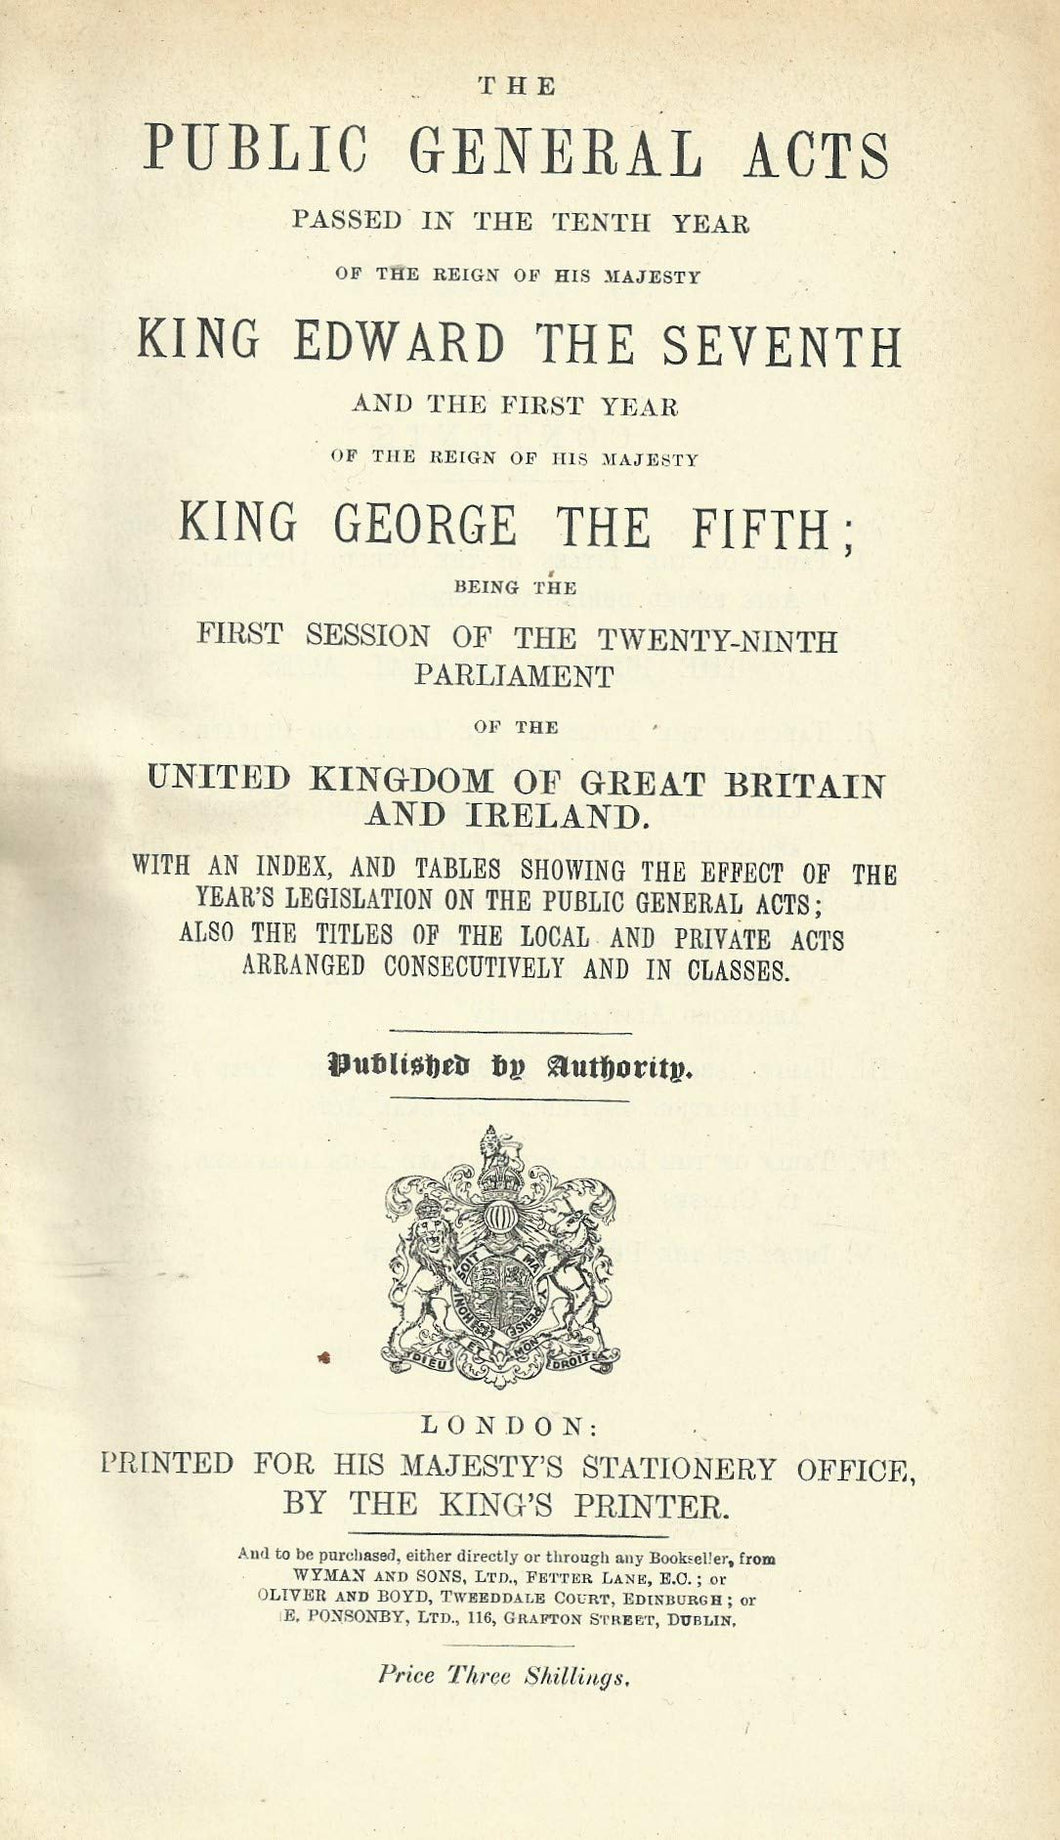 The Public General Acts 1910 - 10 Edw 7 and 1 Geo 5